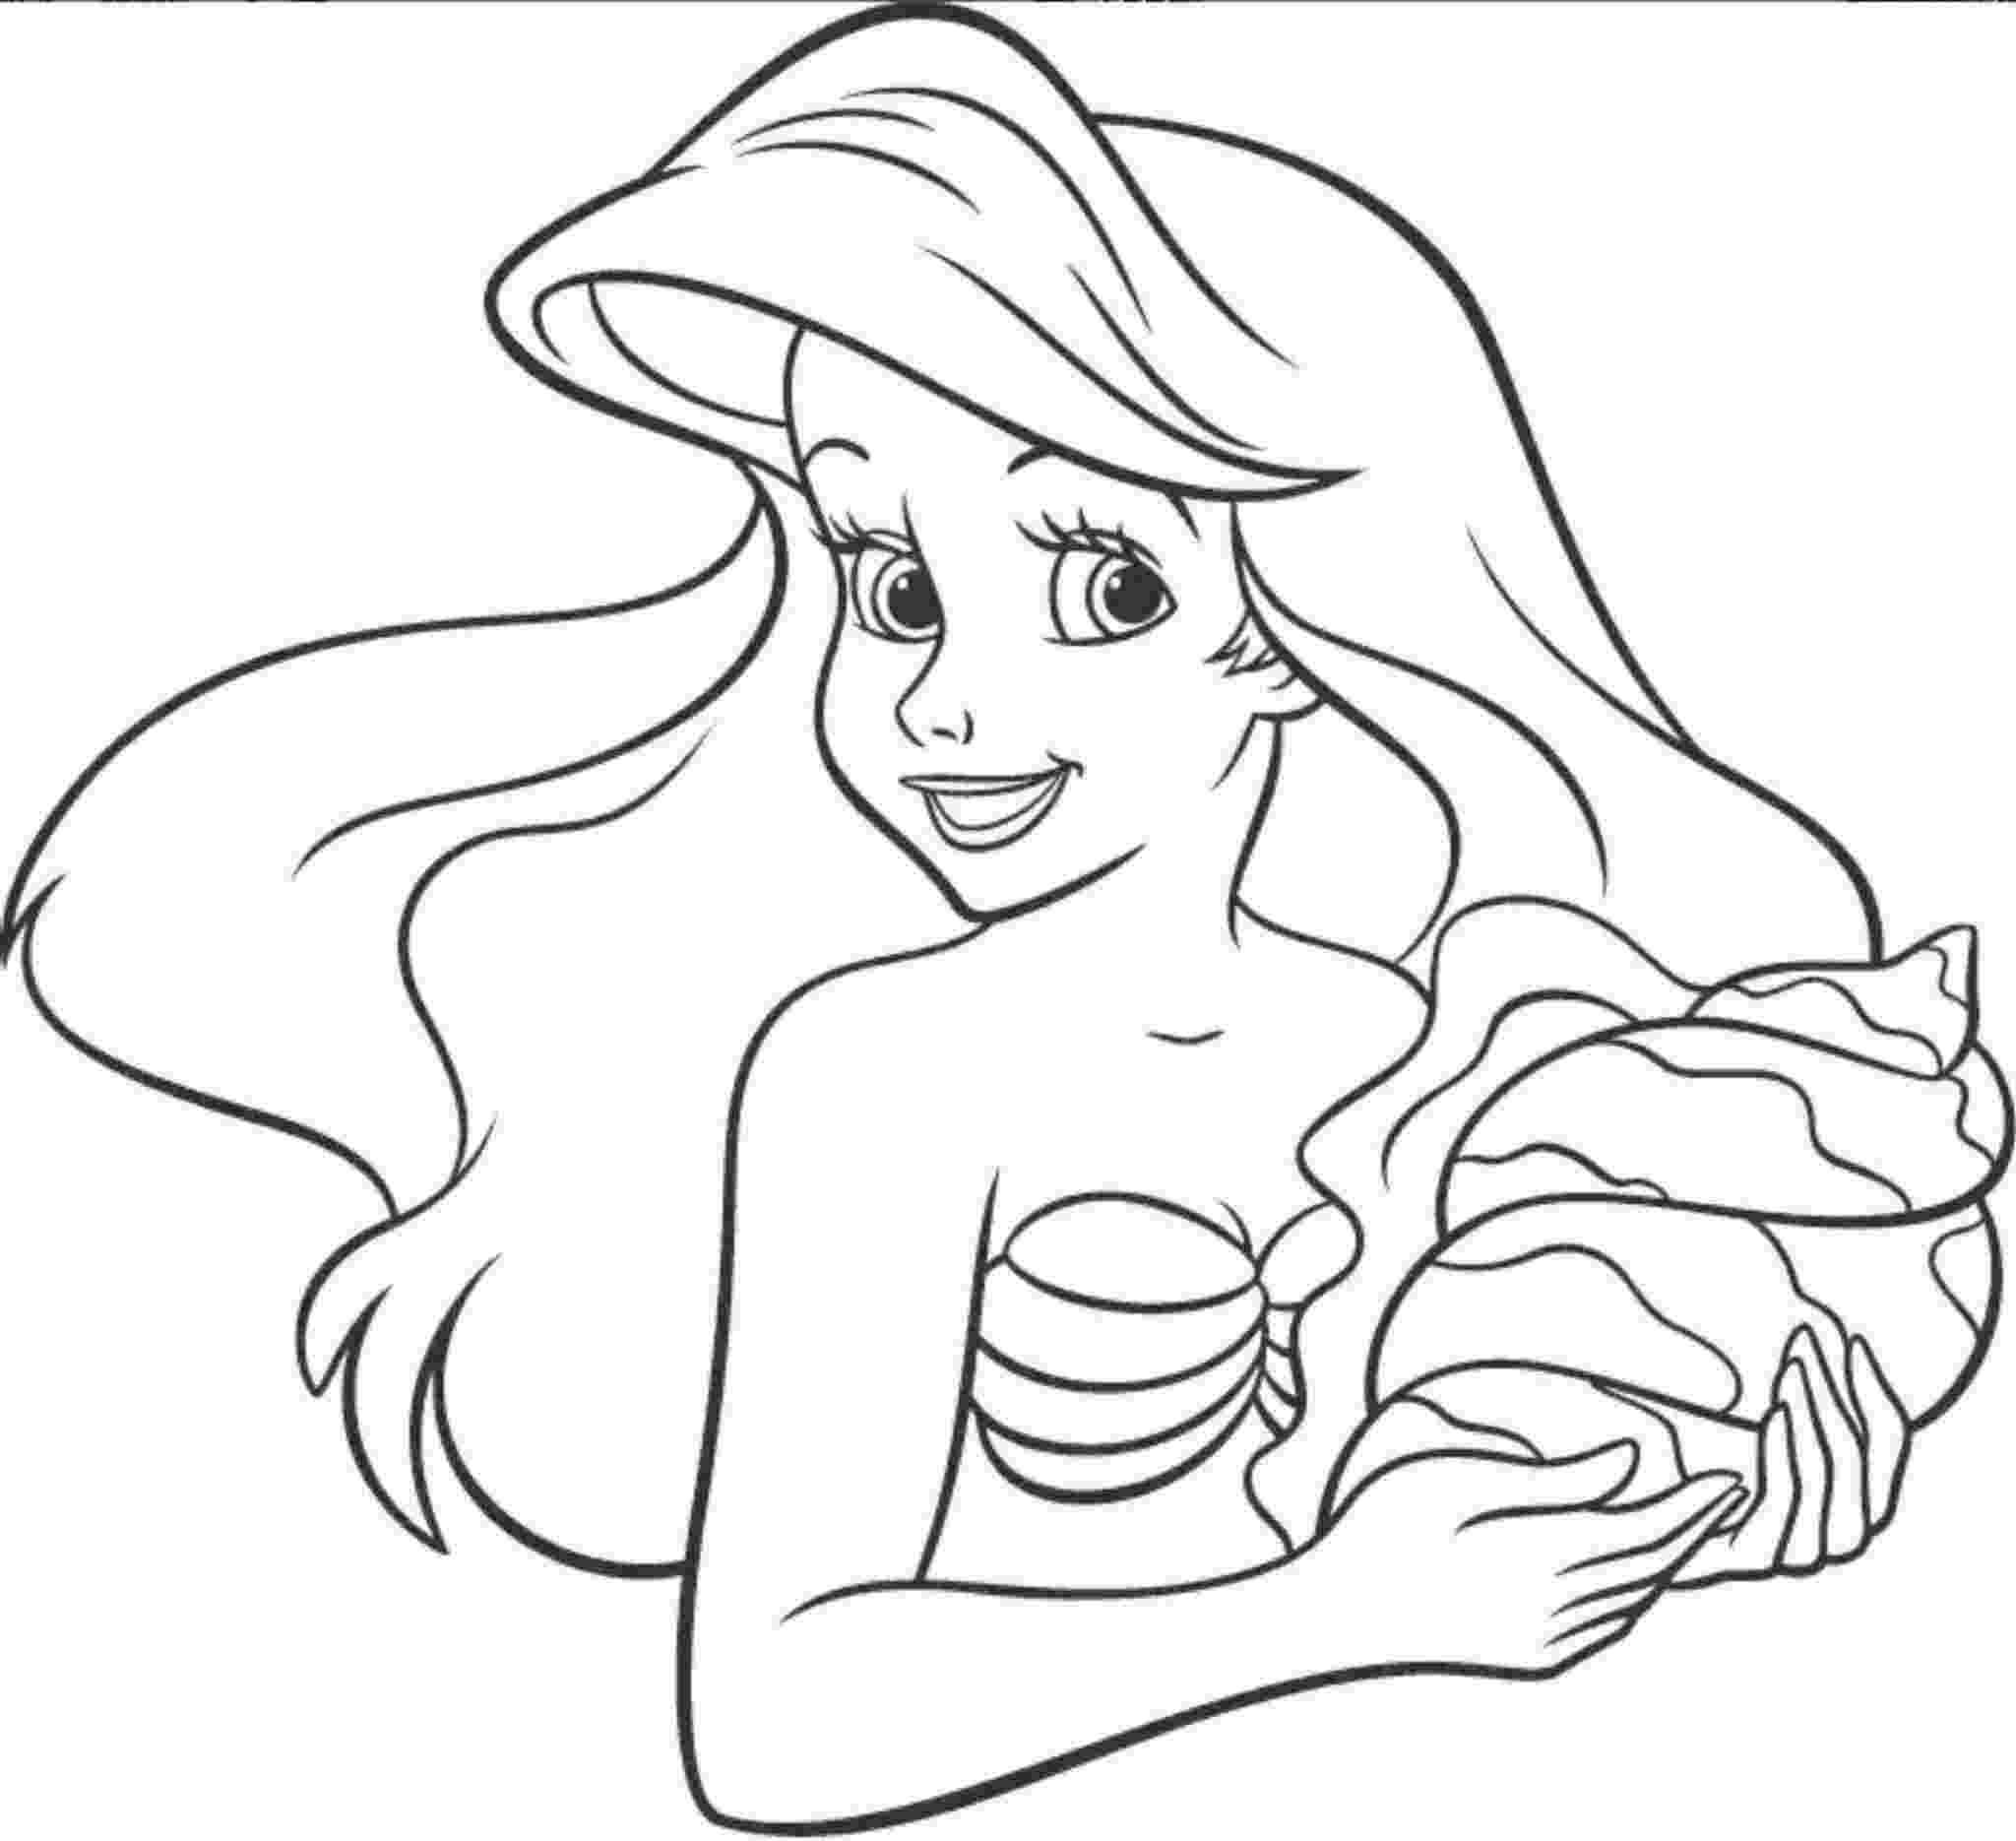 ariel the little mermaid coloring pages print download find the suitable little mermaid mermaid ariel the coloring pages little 